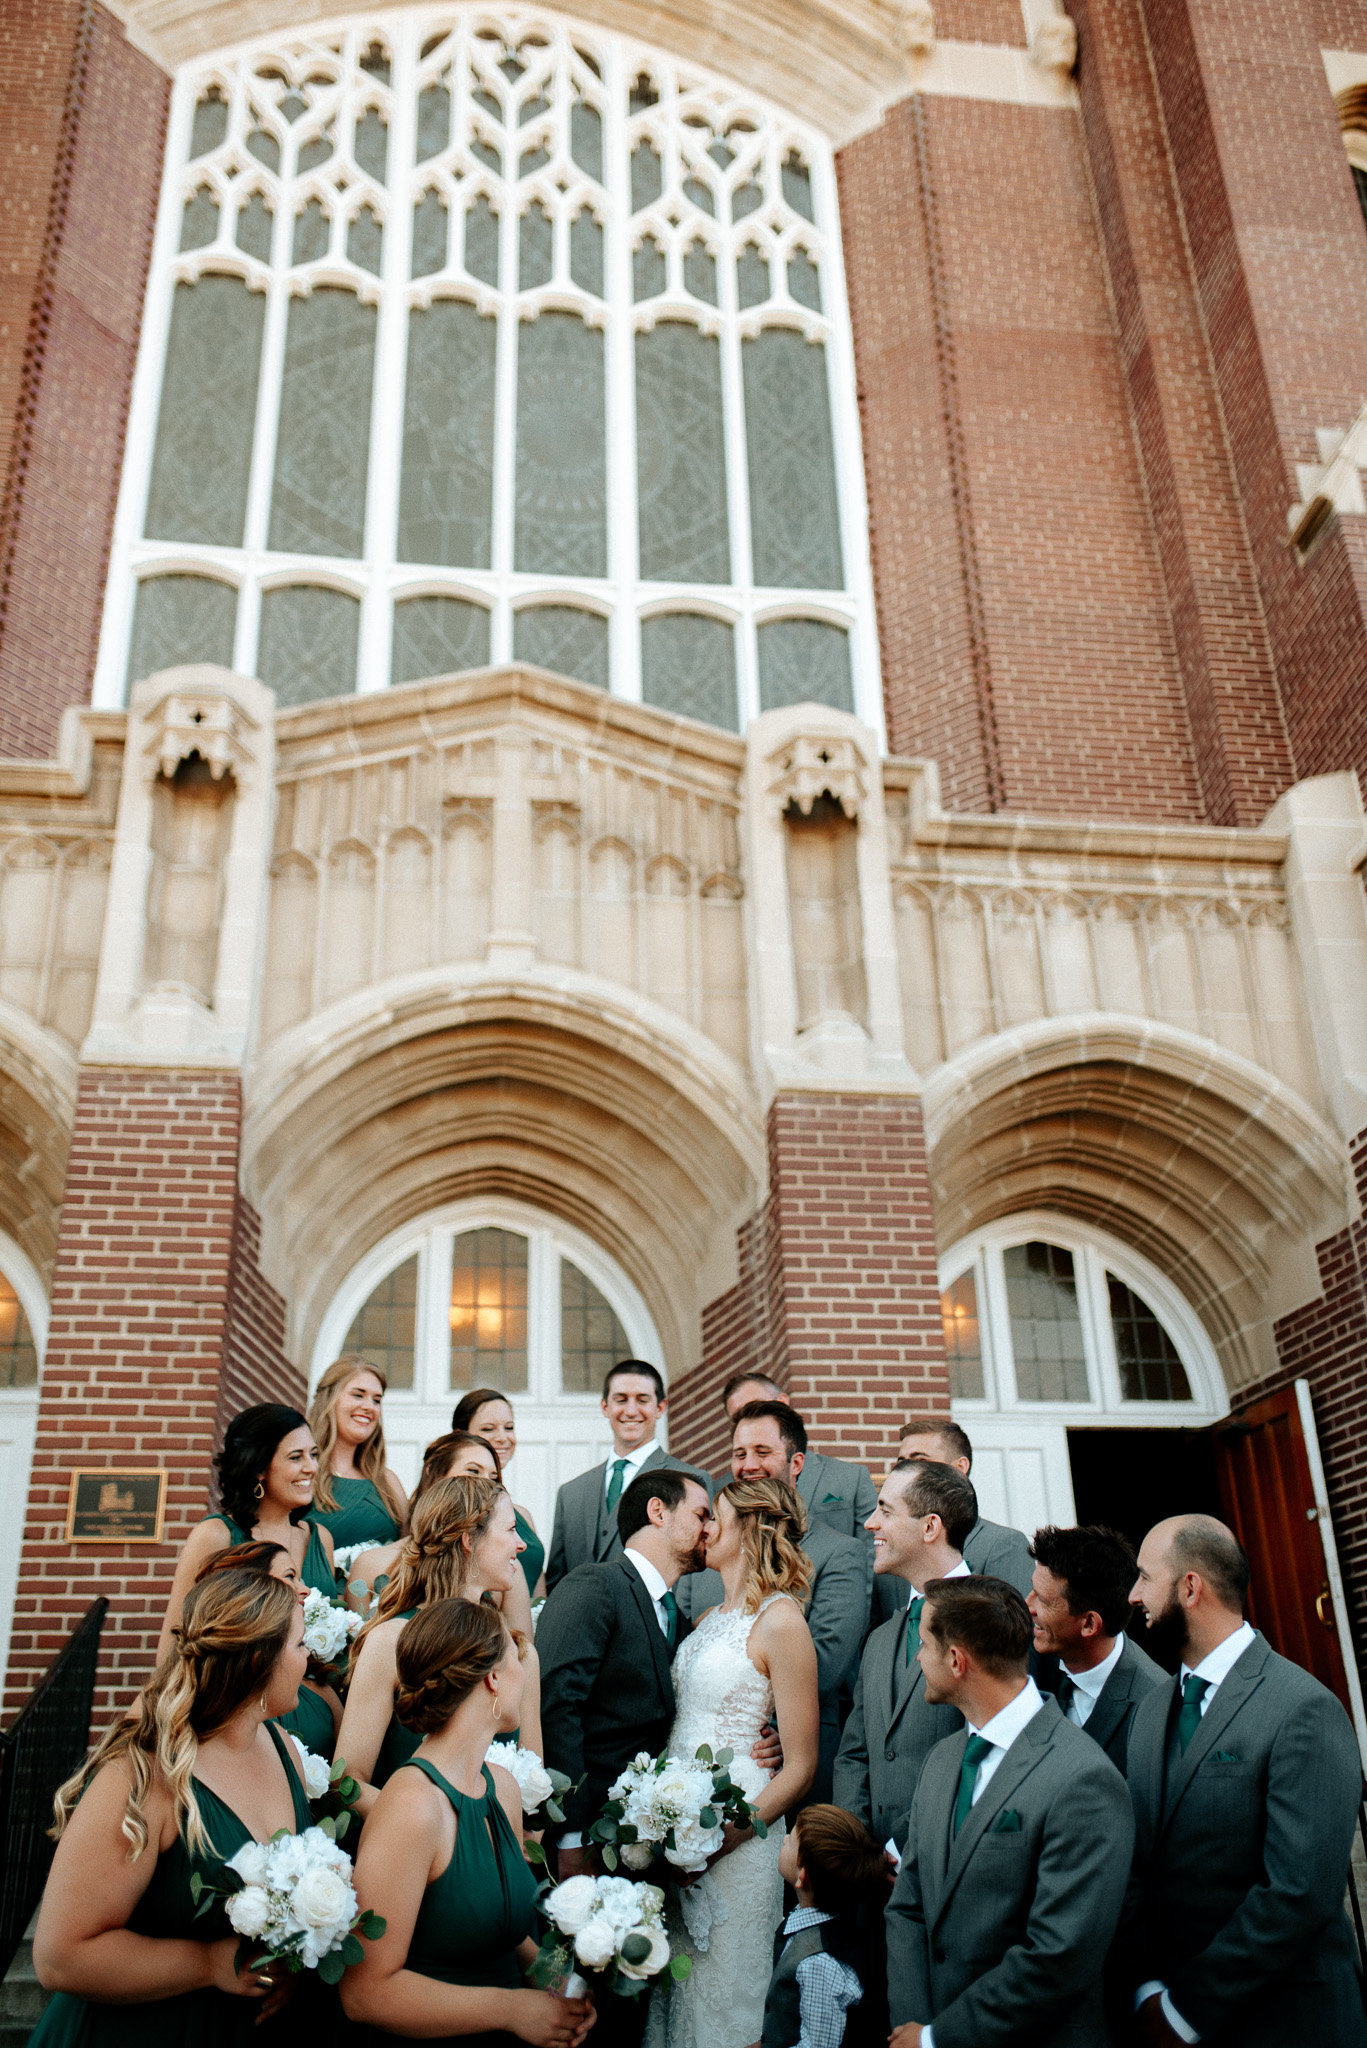 Gorgeous cathedral in Denver Co, photo of bride and groom kissing on the steps surrounded by their bridal party